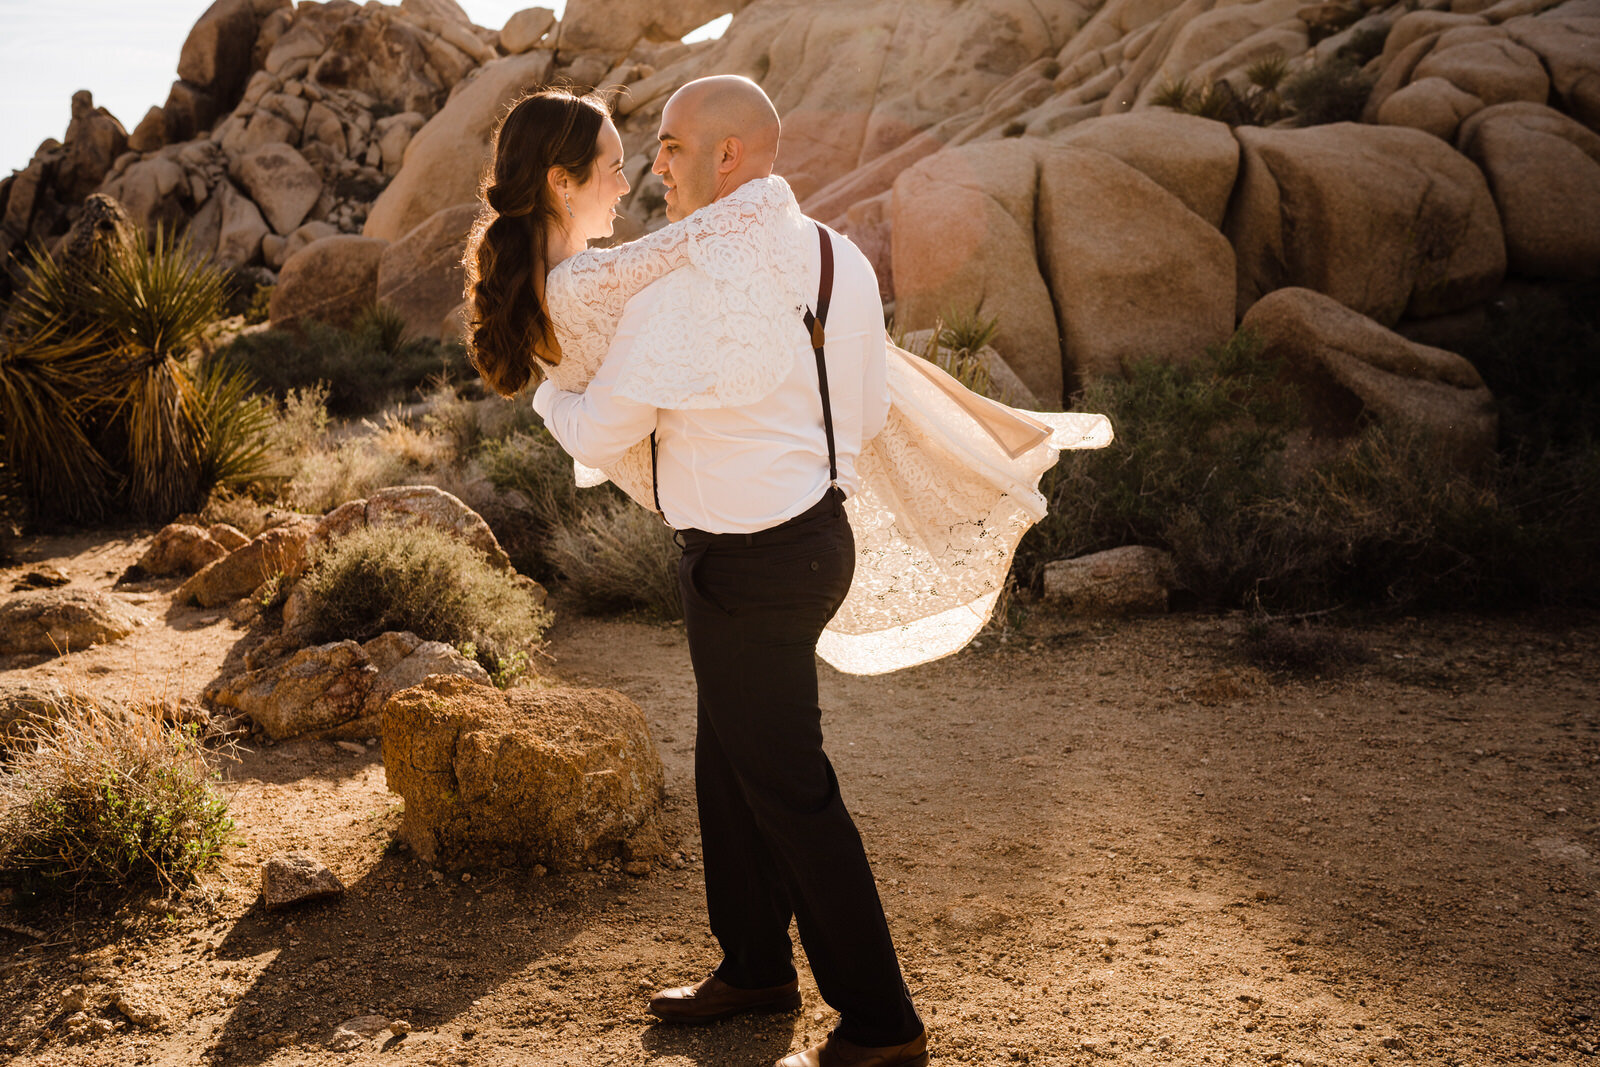 Groom spins bride in bohemian gown at Live Oak picnic area in Joshua Tree National Park elopement | adventurous, fun, warm wedding photos by Kept Record | www.keptrecord.com